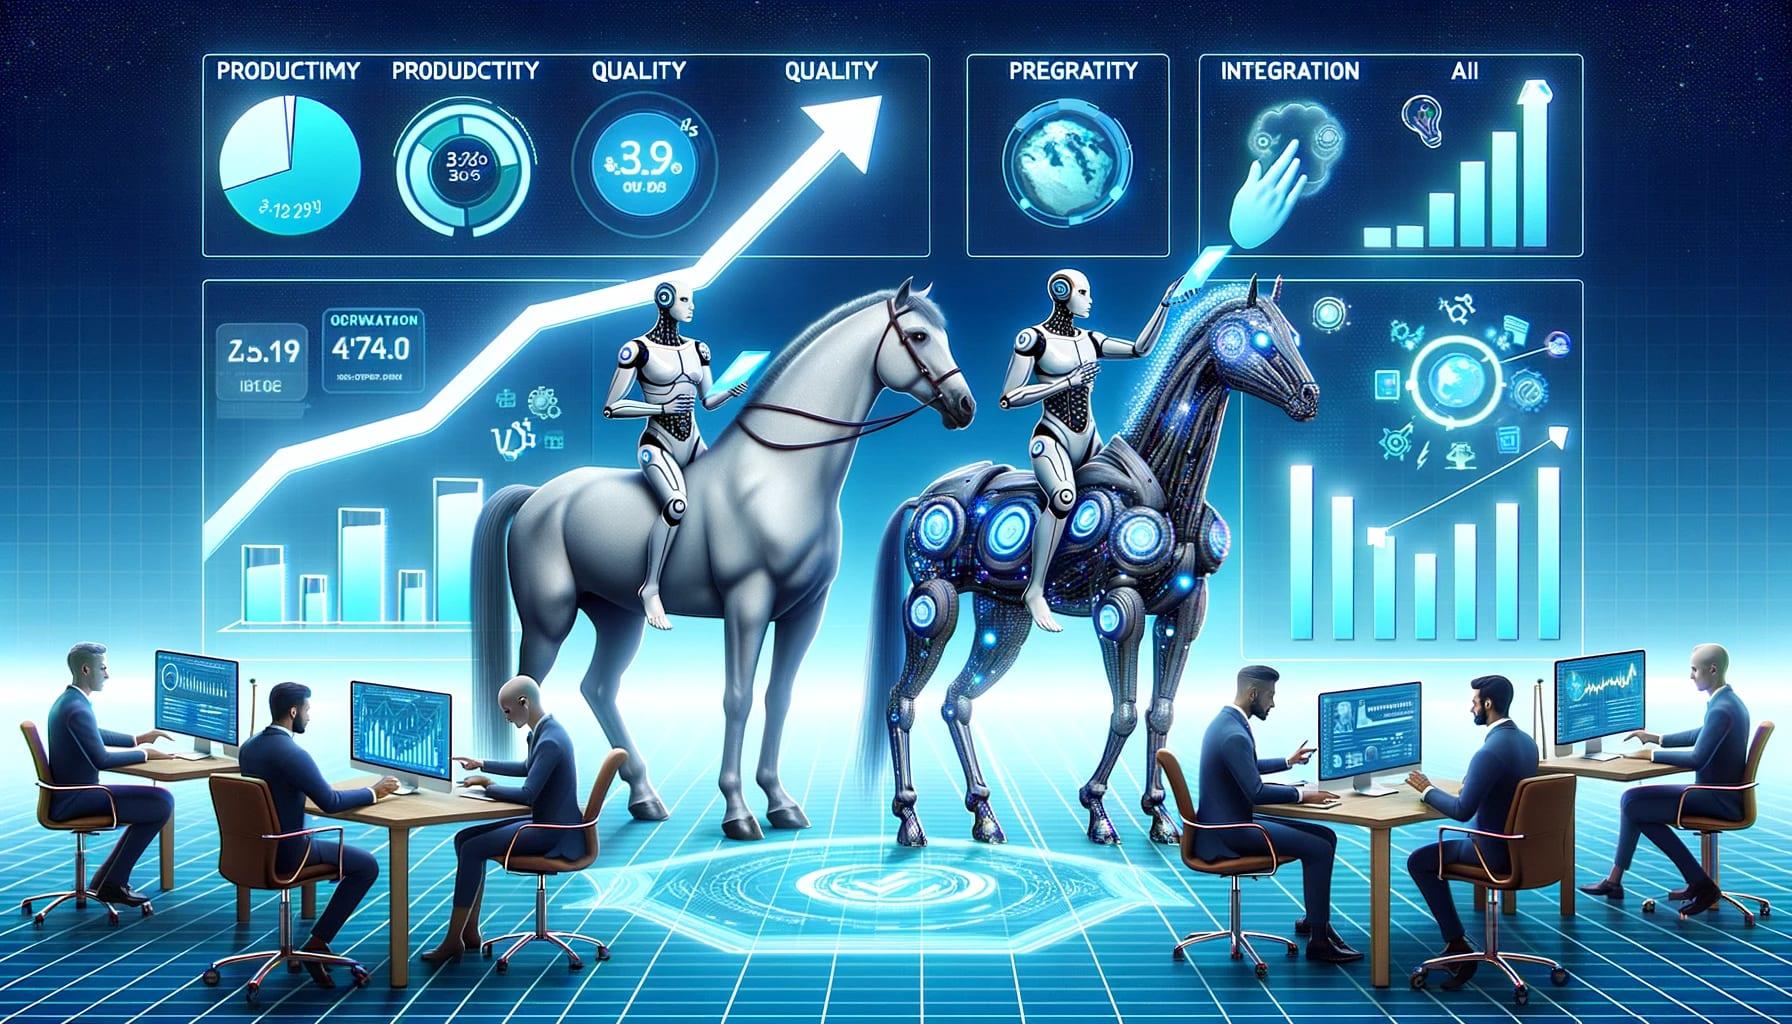 Illustration of a futuristic consulting office where Centaurs and Cyborgs collaborate. Centaurs, with their human torsos and horse lower bodies, are s